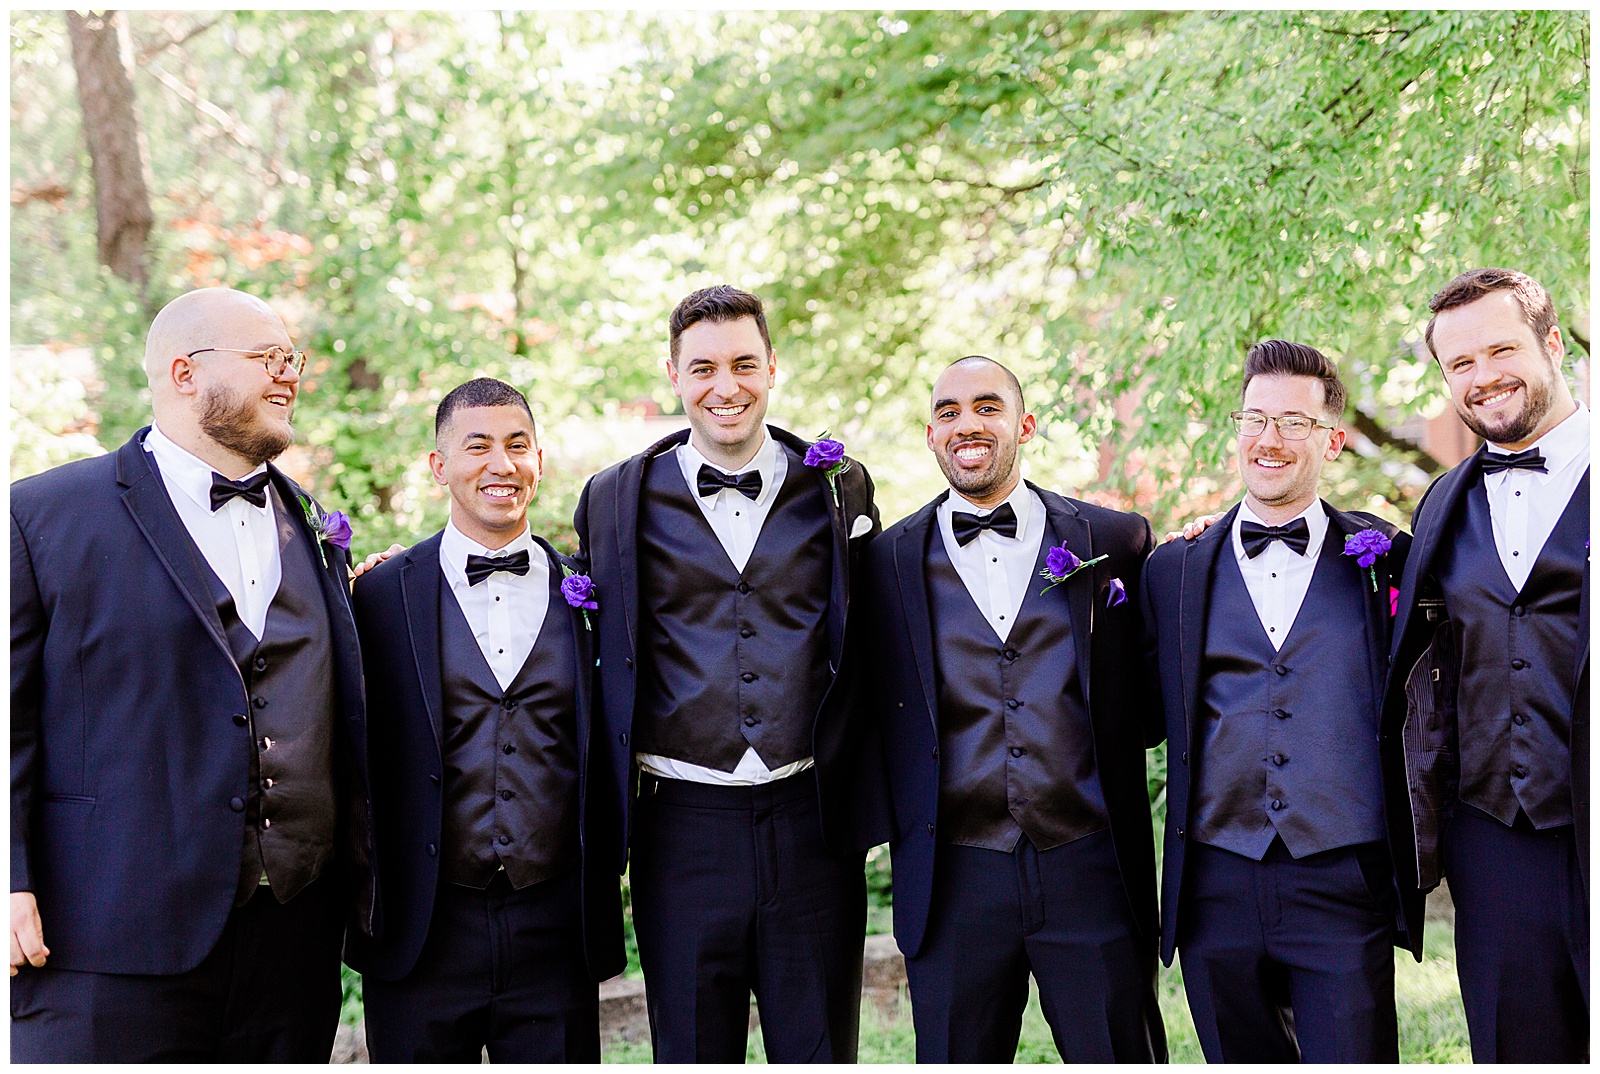 💍 groomsmen and groom group photo matching black tux tuxedos 💍 Bright Colorful Summer City Wedding in Charlotte, NC with Taryn and Ryan | Kevyn Dixon Photography